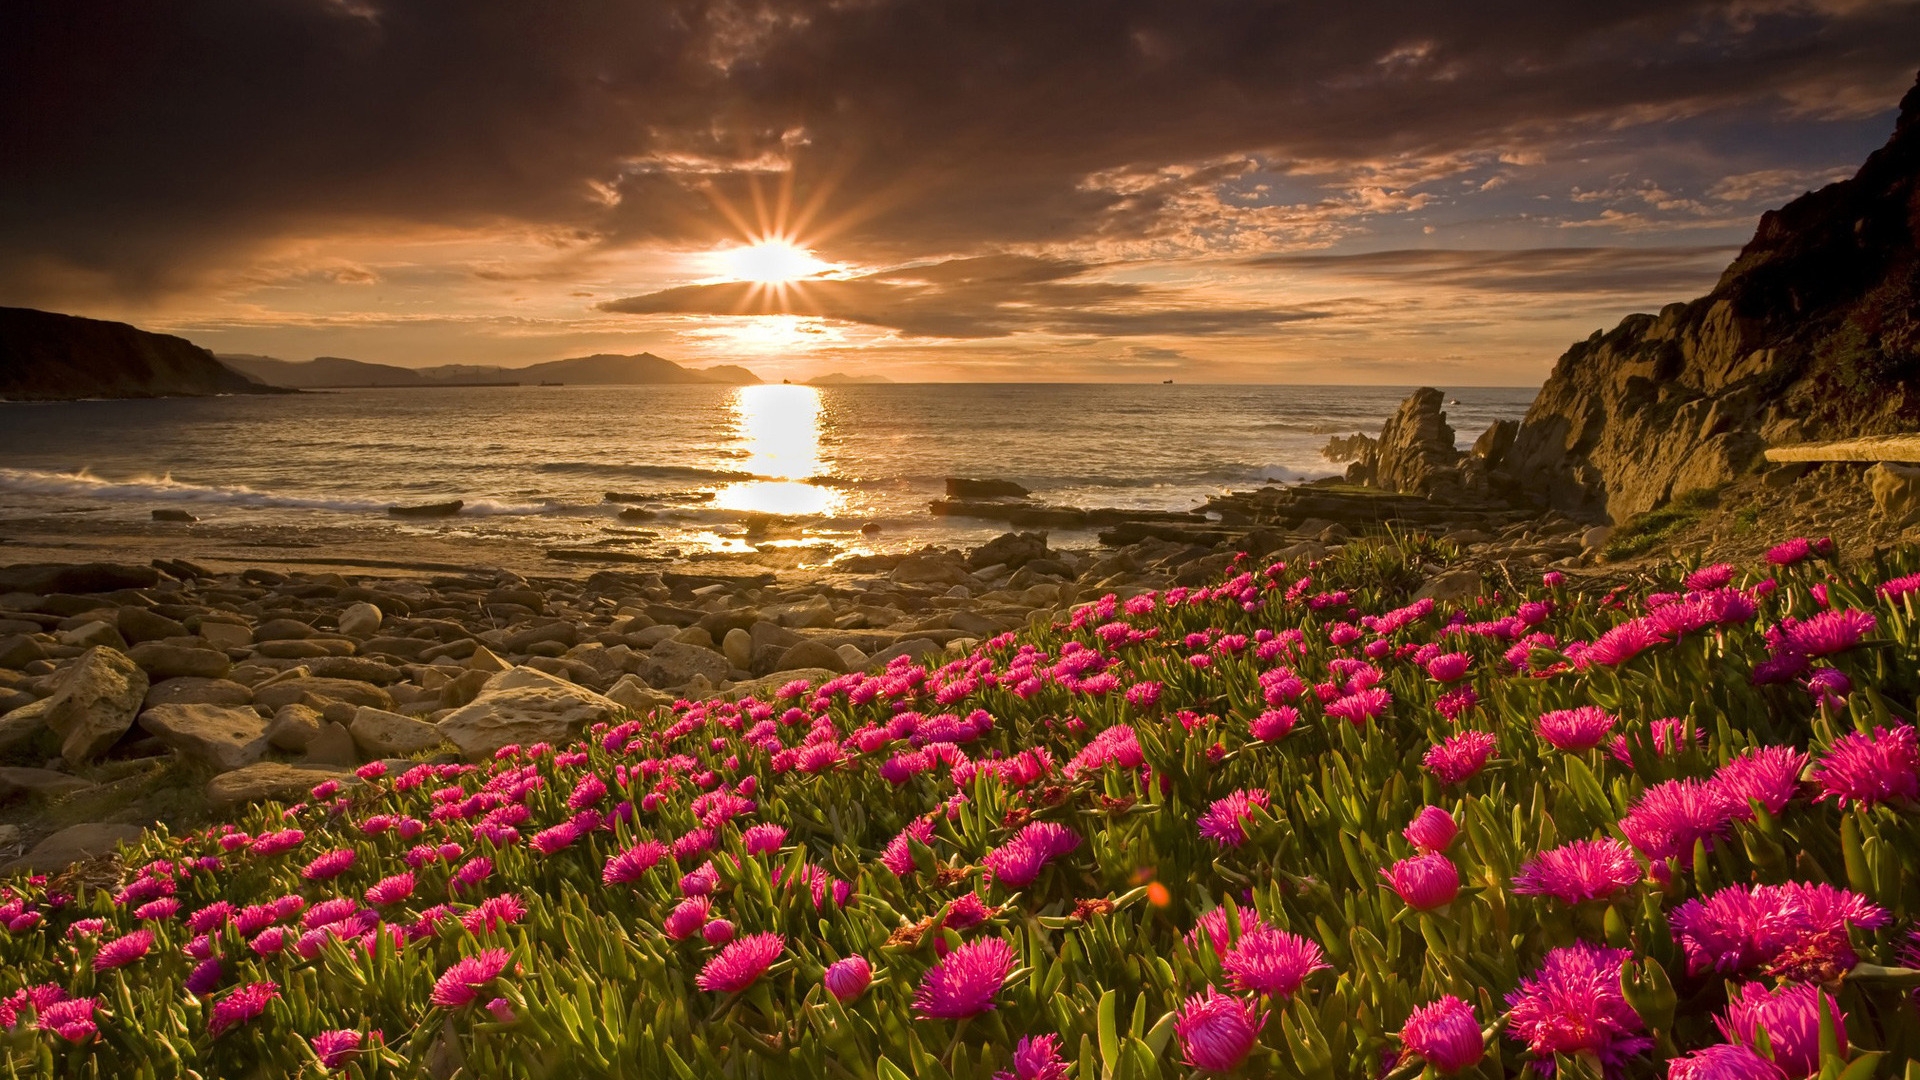 Flowers and Sunset for 1920 x 1080 HDTV 1080p resolution